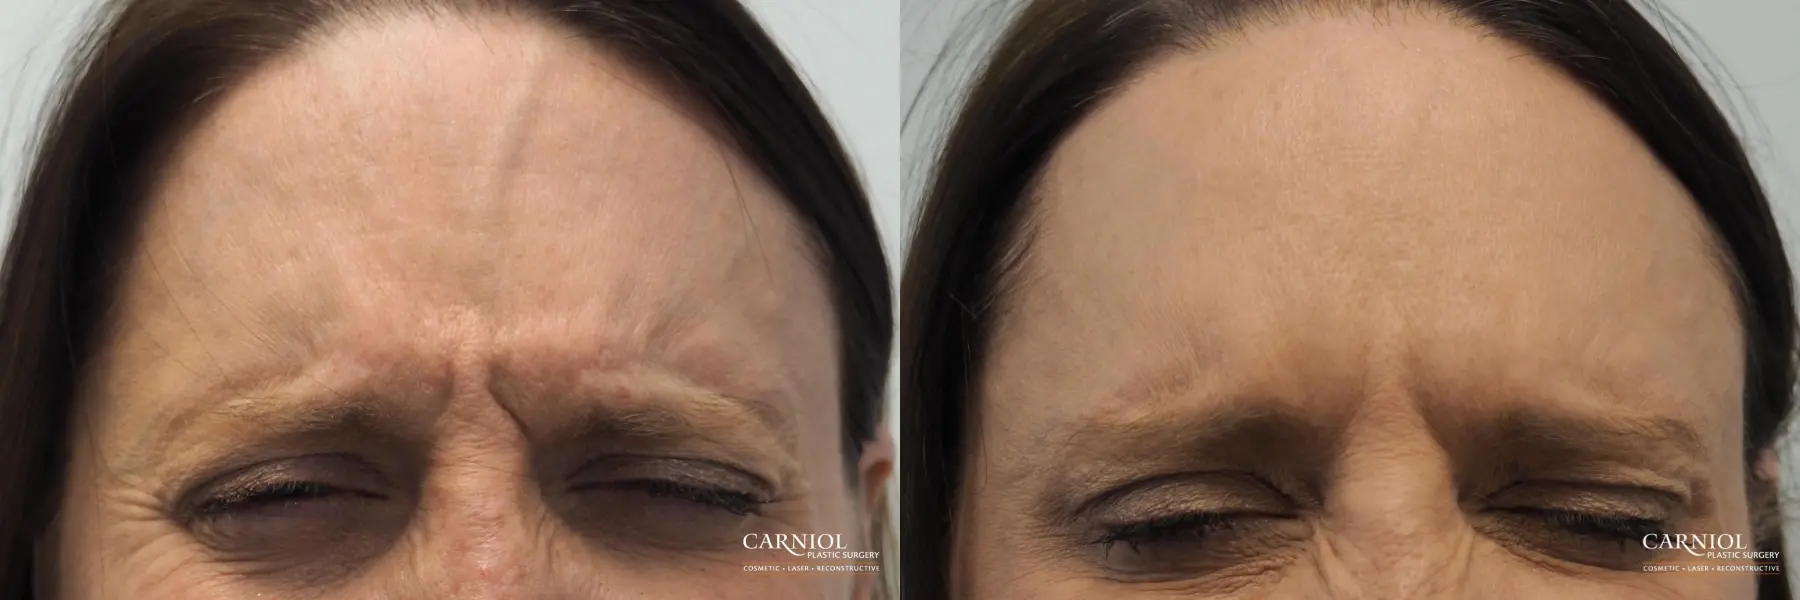 BOTOX® Cosmetic: Patient 4 - Before and After 3